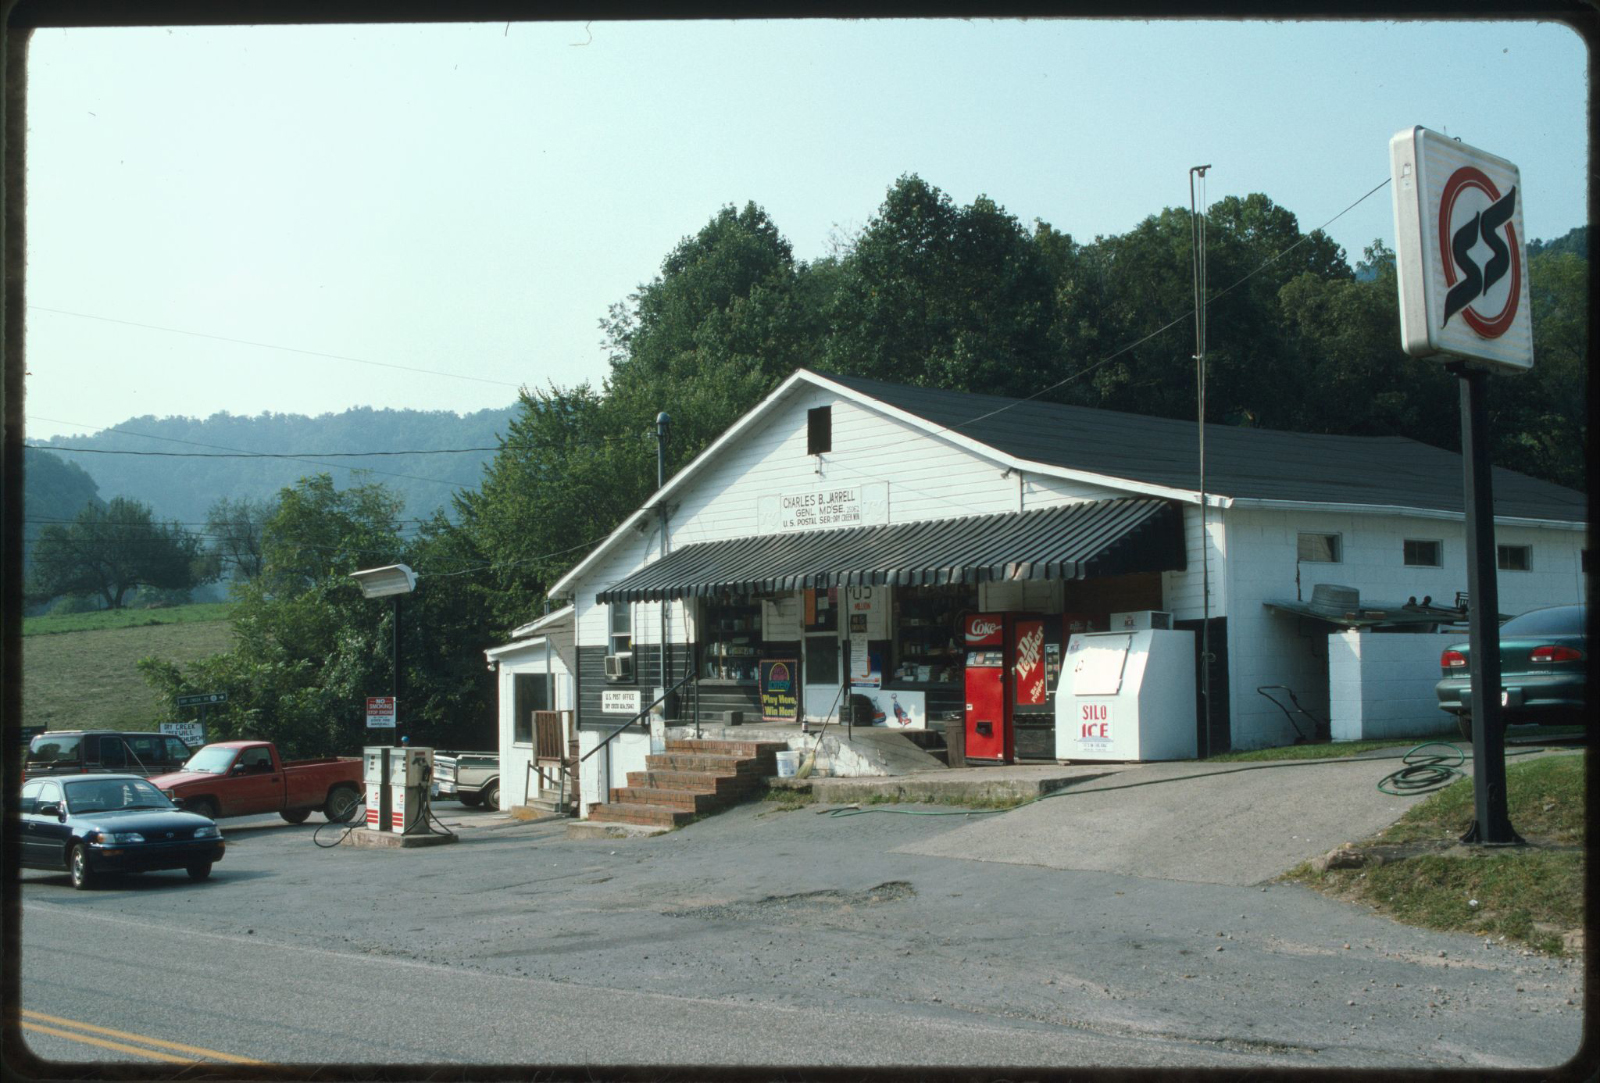 Small white convenience store with black awning and ice and soda machines out front, with a small gas pump to the left and trees in the background